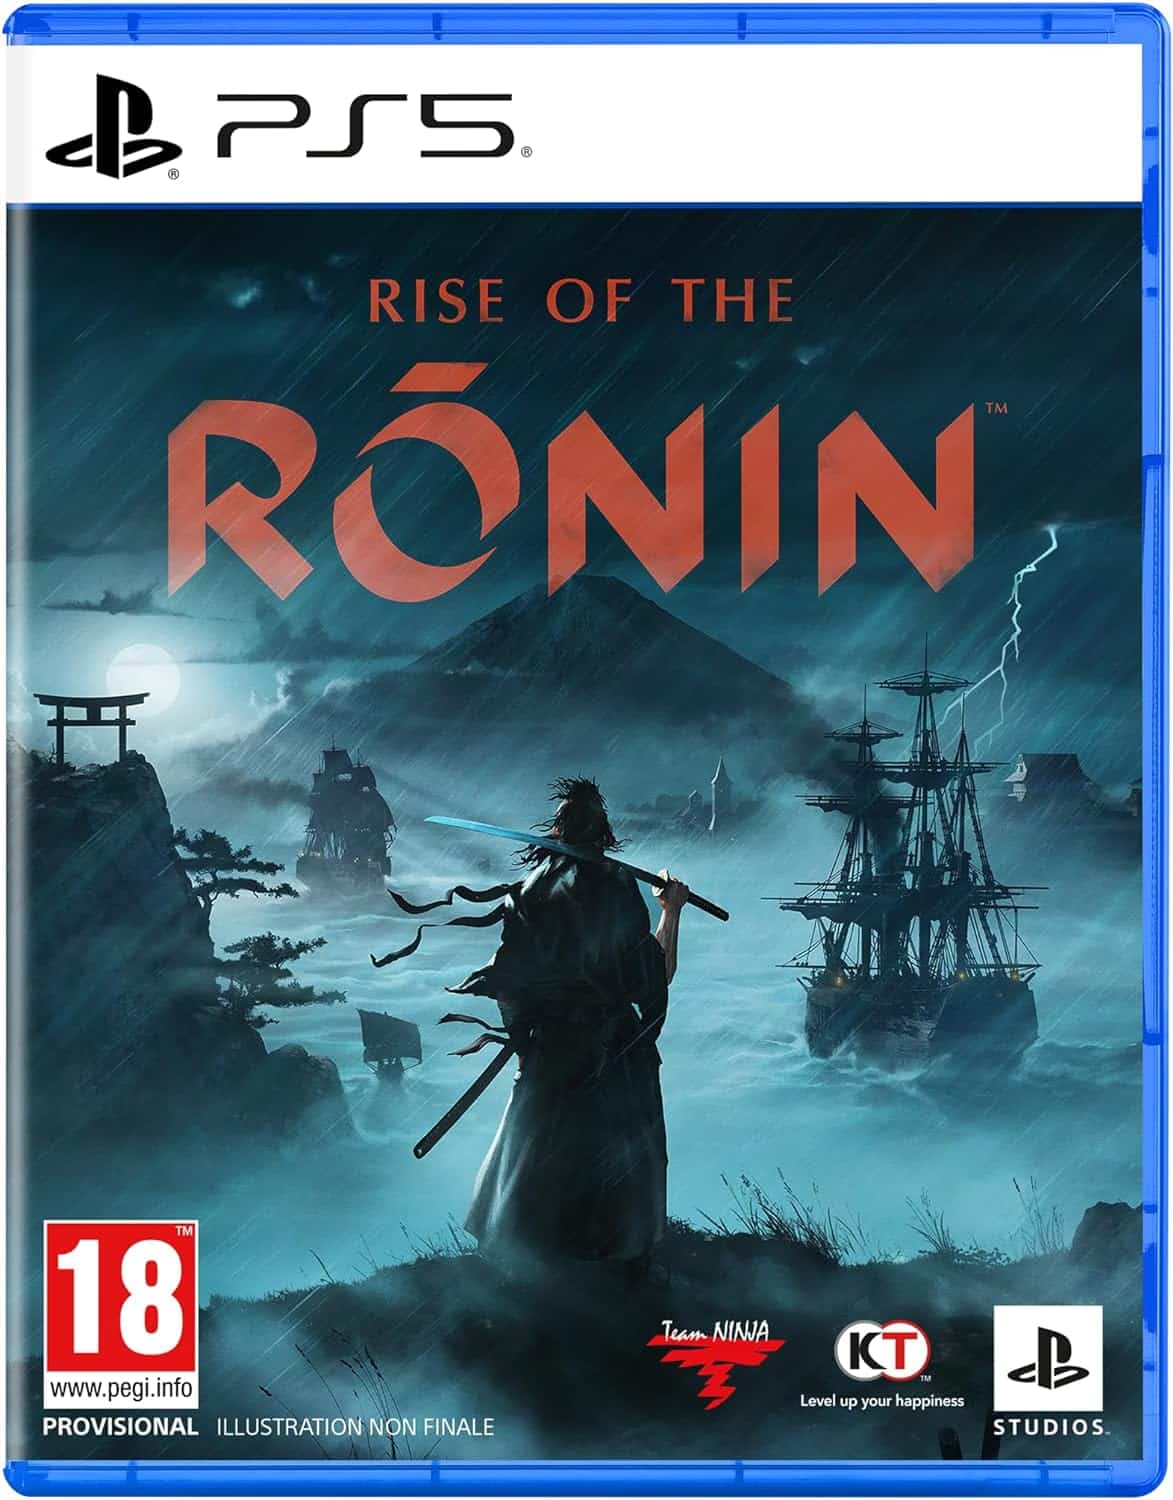 Rise of the ronin cover 1